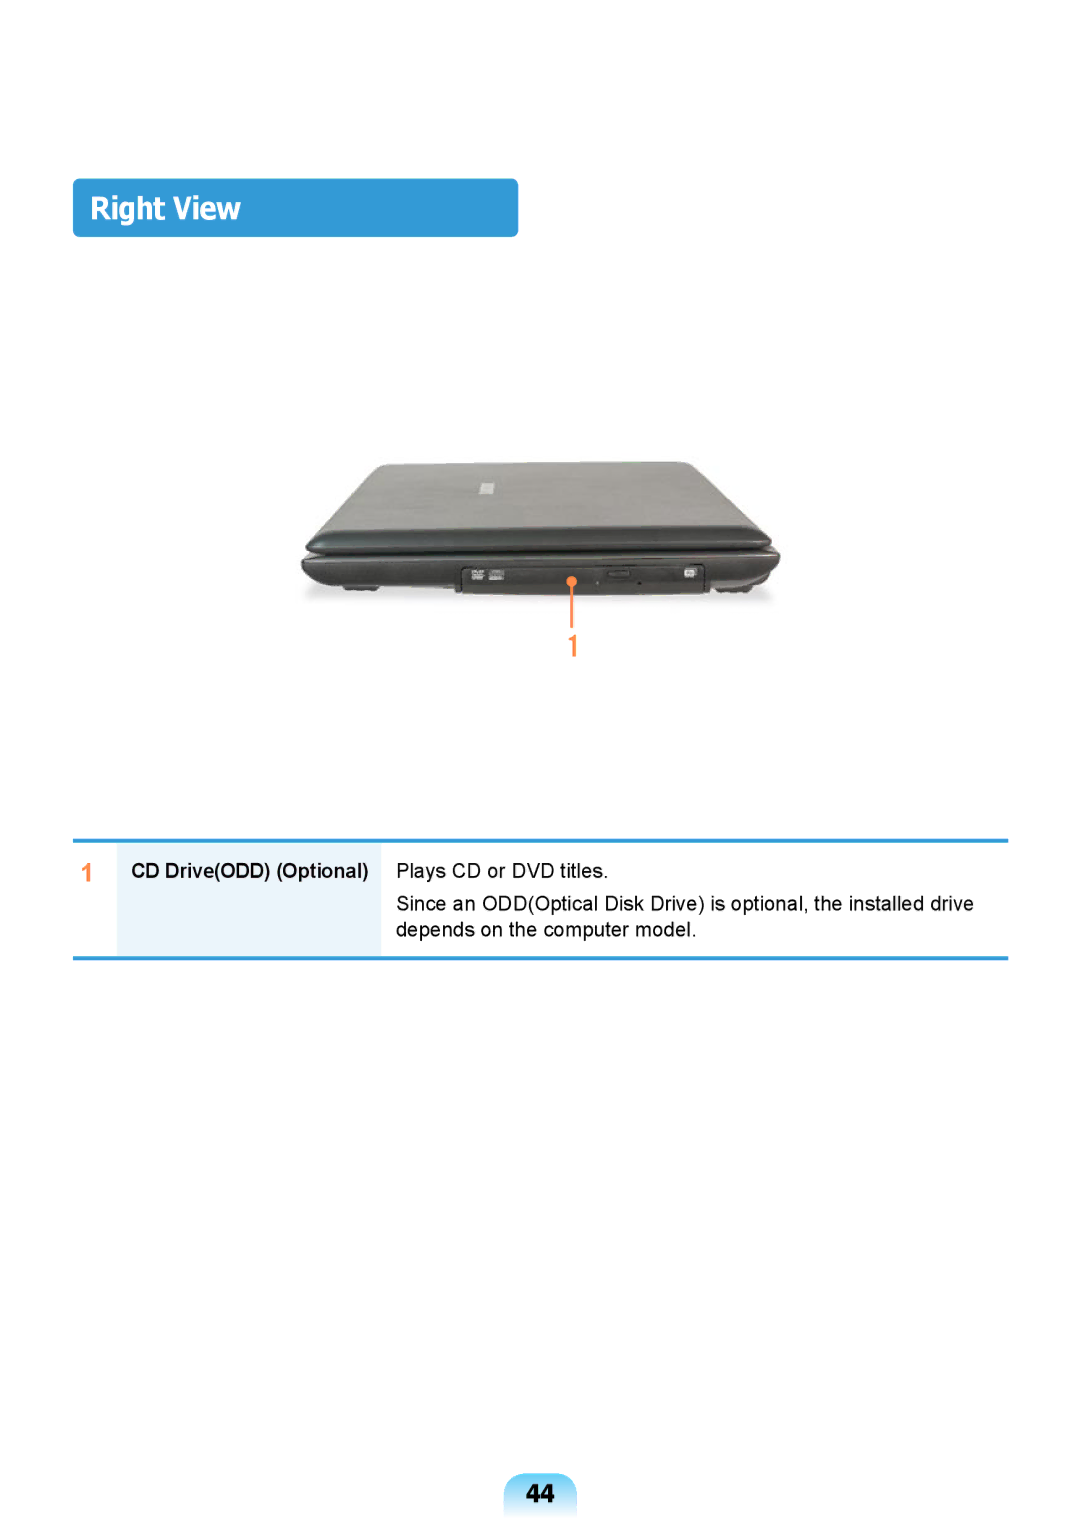 Samsung NP350U2Y-A07VN, NP270E5R-X01TR, NP270E5U-K03TR manual Right View, CD DriveODD Optional Plays CD or DVD titles 